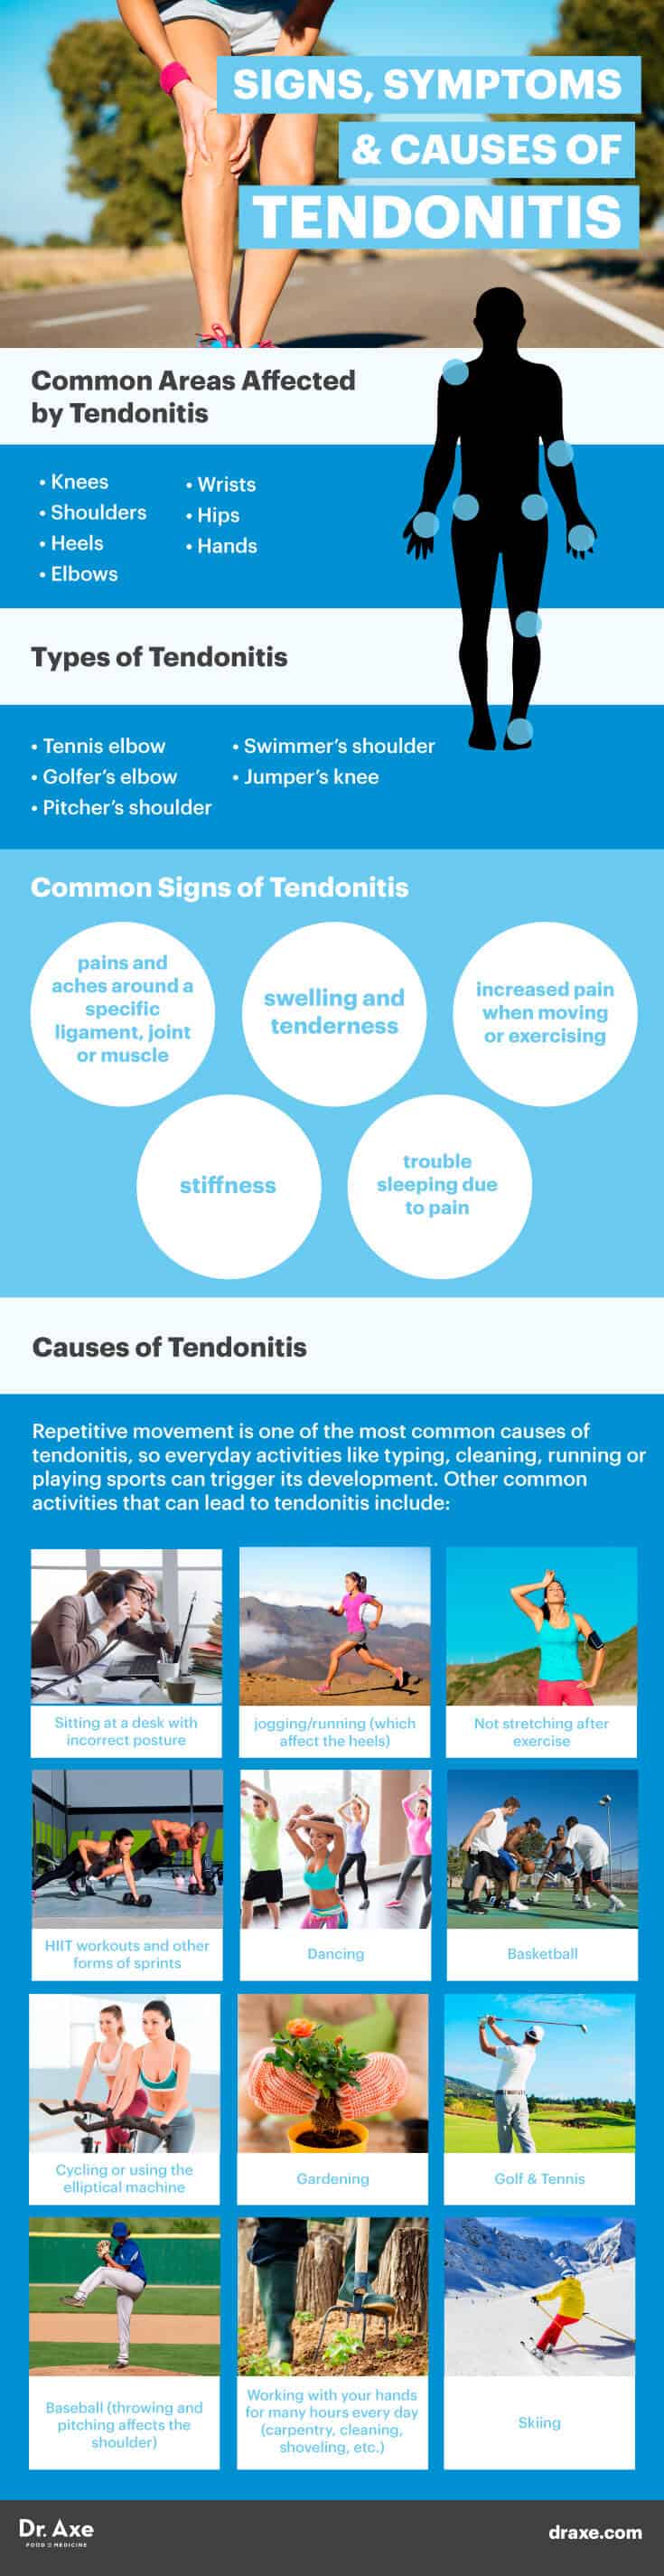 Signs, symptoms & causes of tendonitis - Dr. Axe